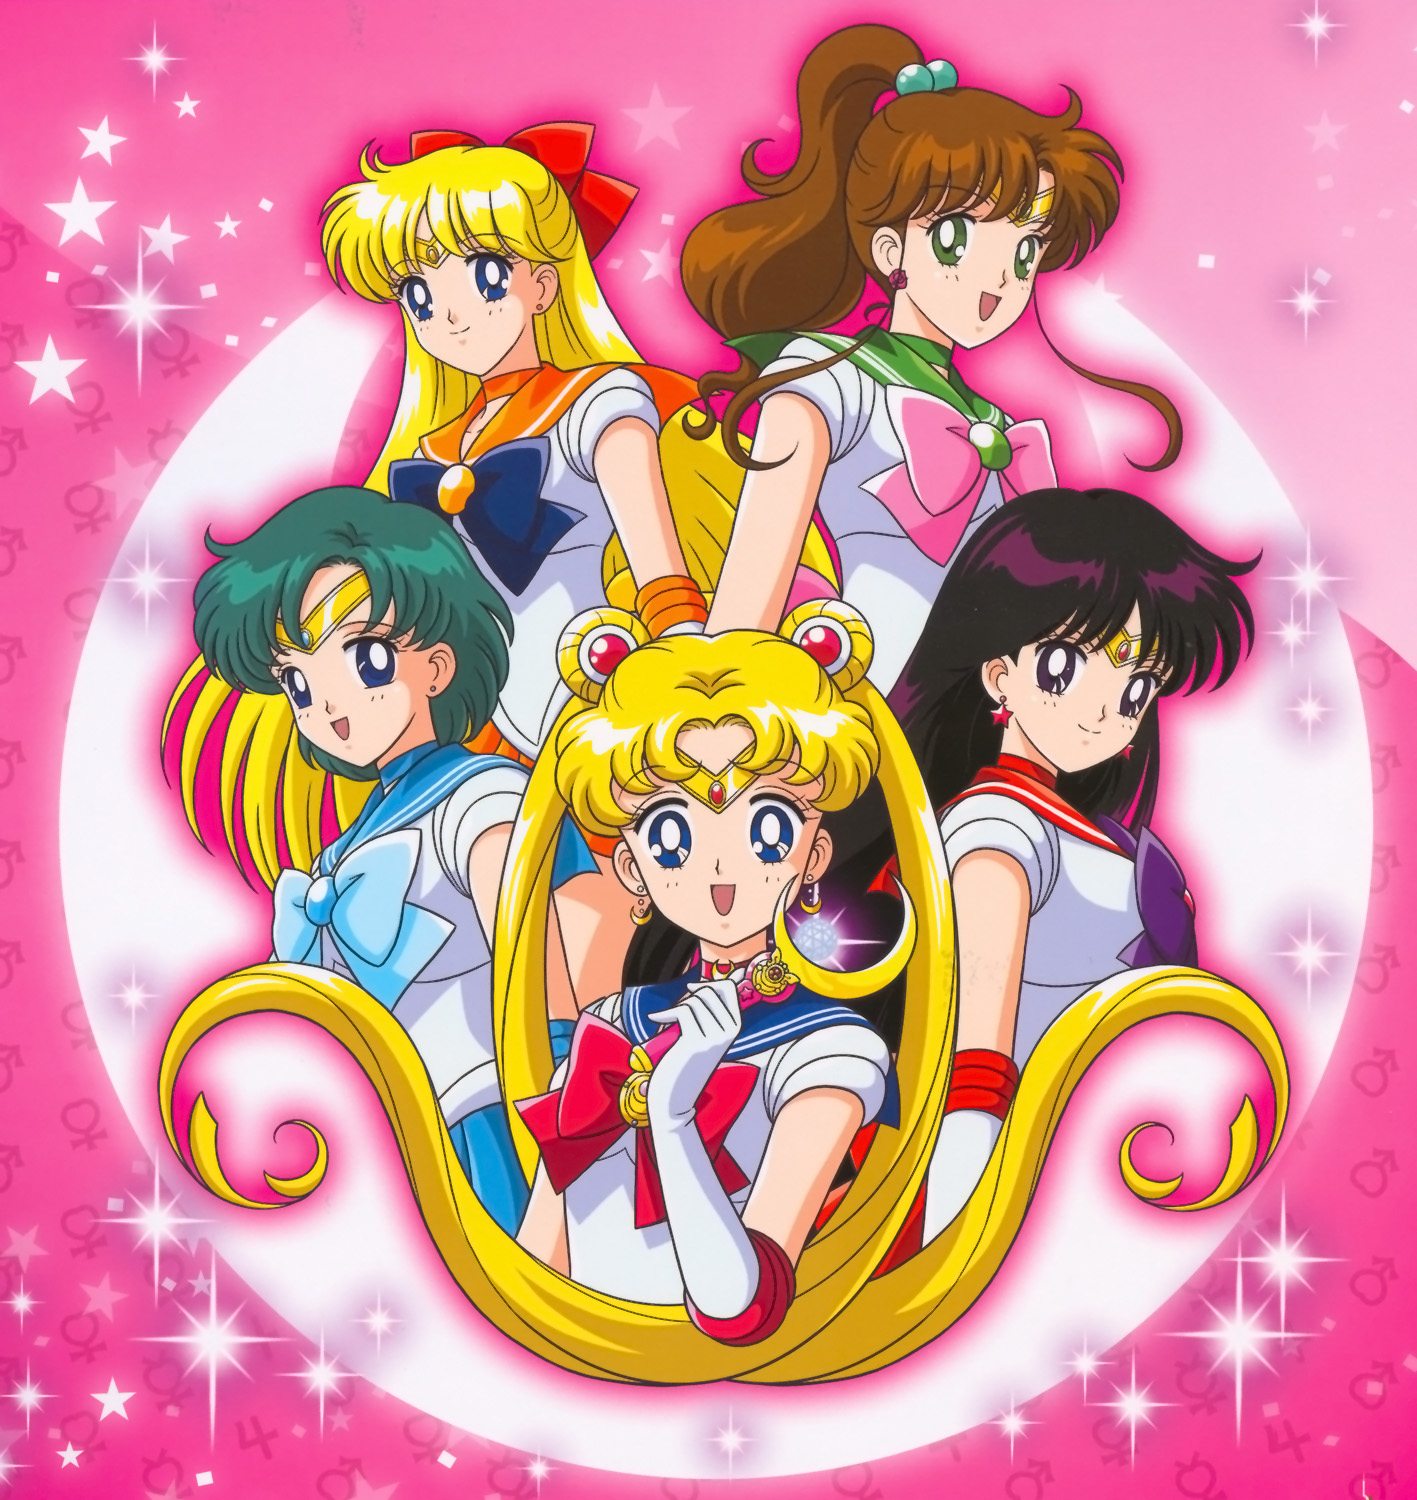 Collection 91+ Pictures Images Of Sailor Moon Full HD, 2k, 4k